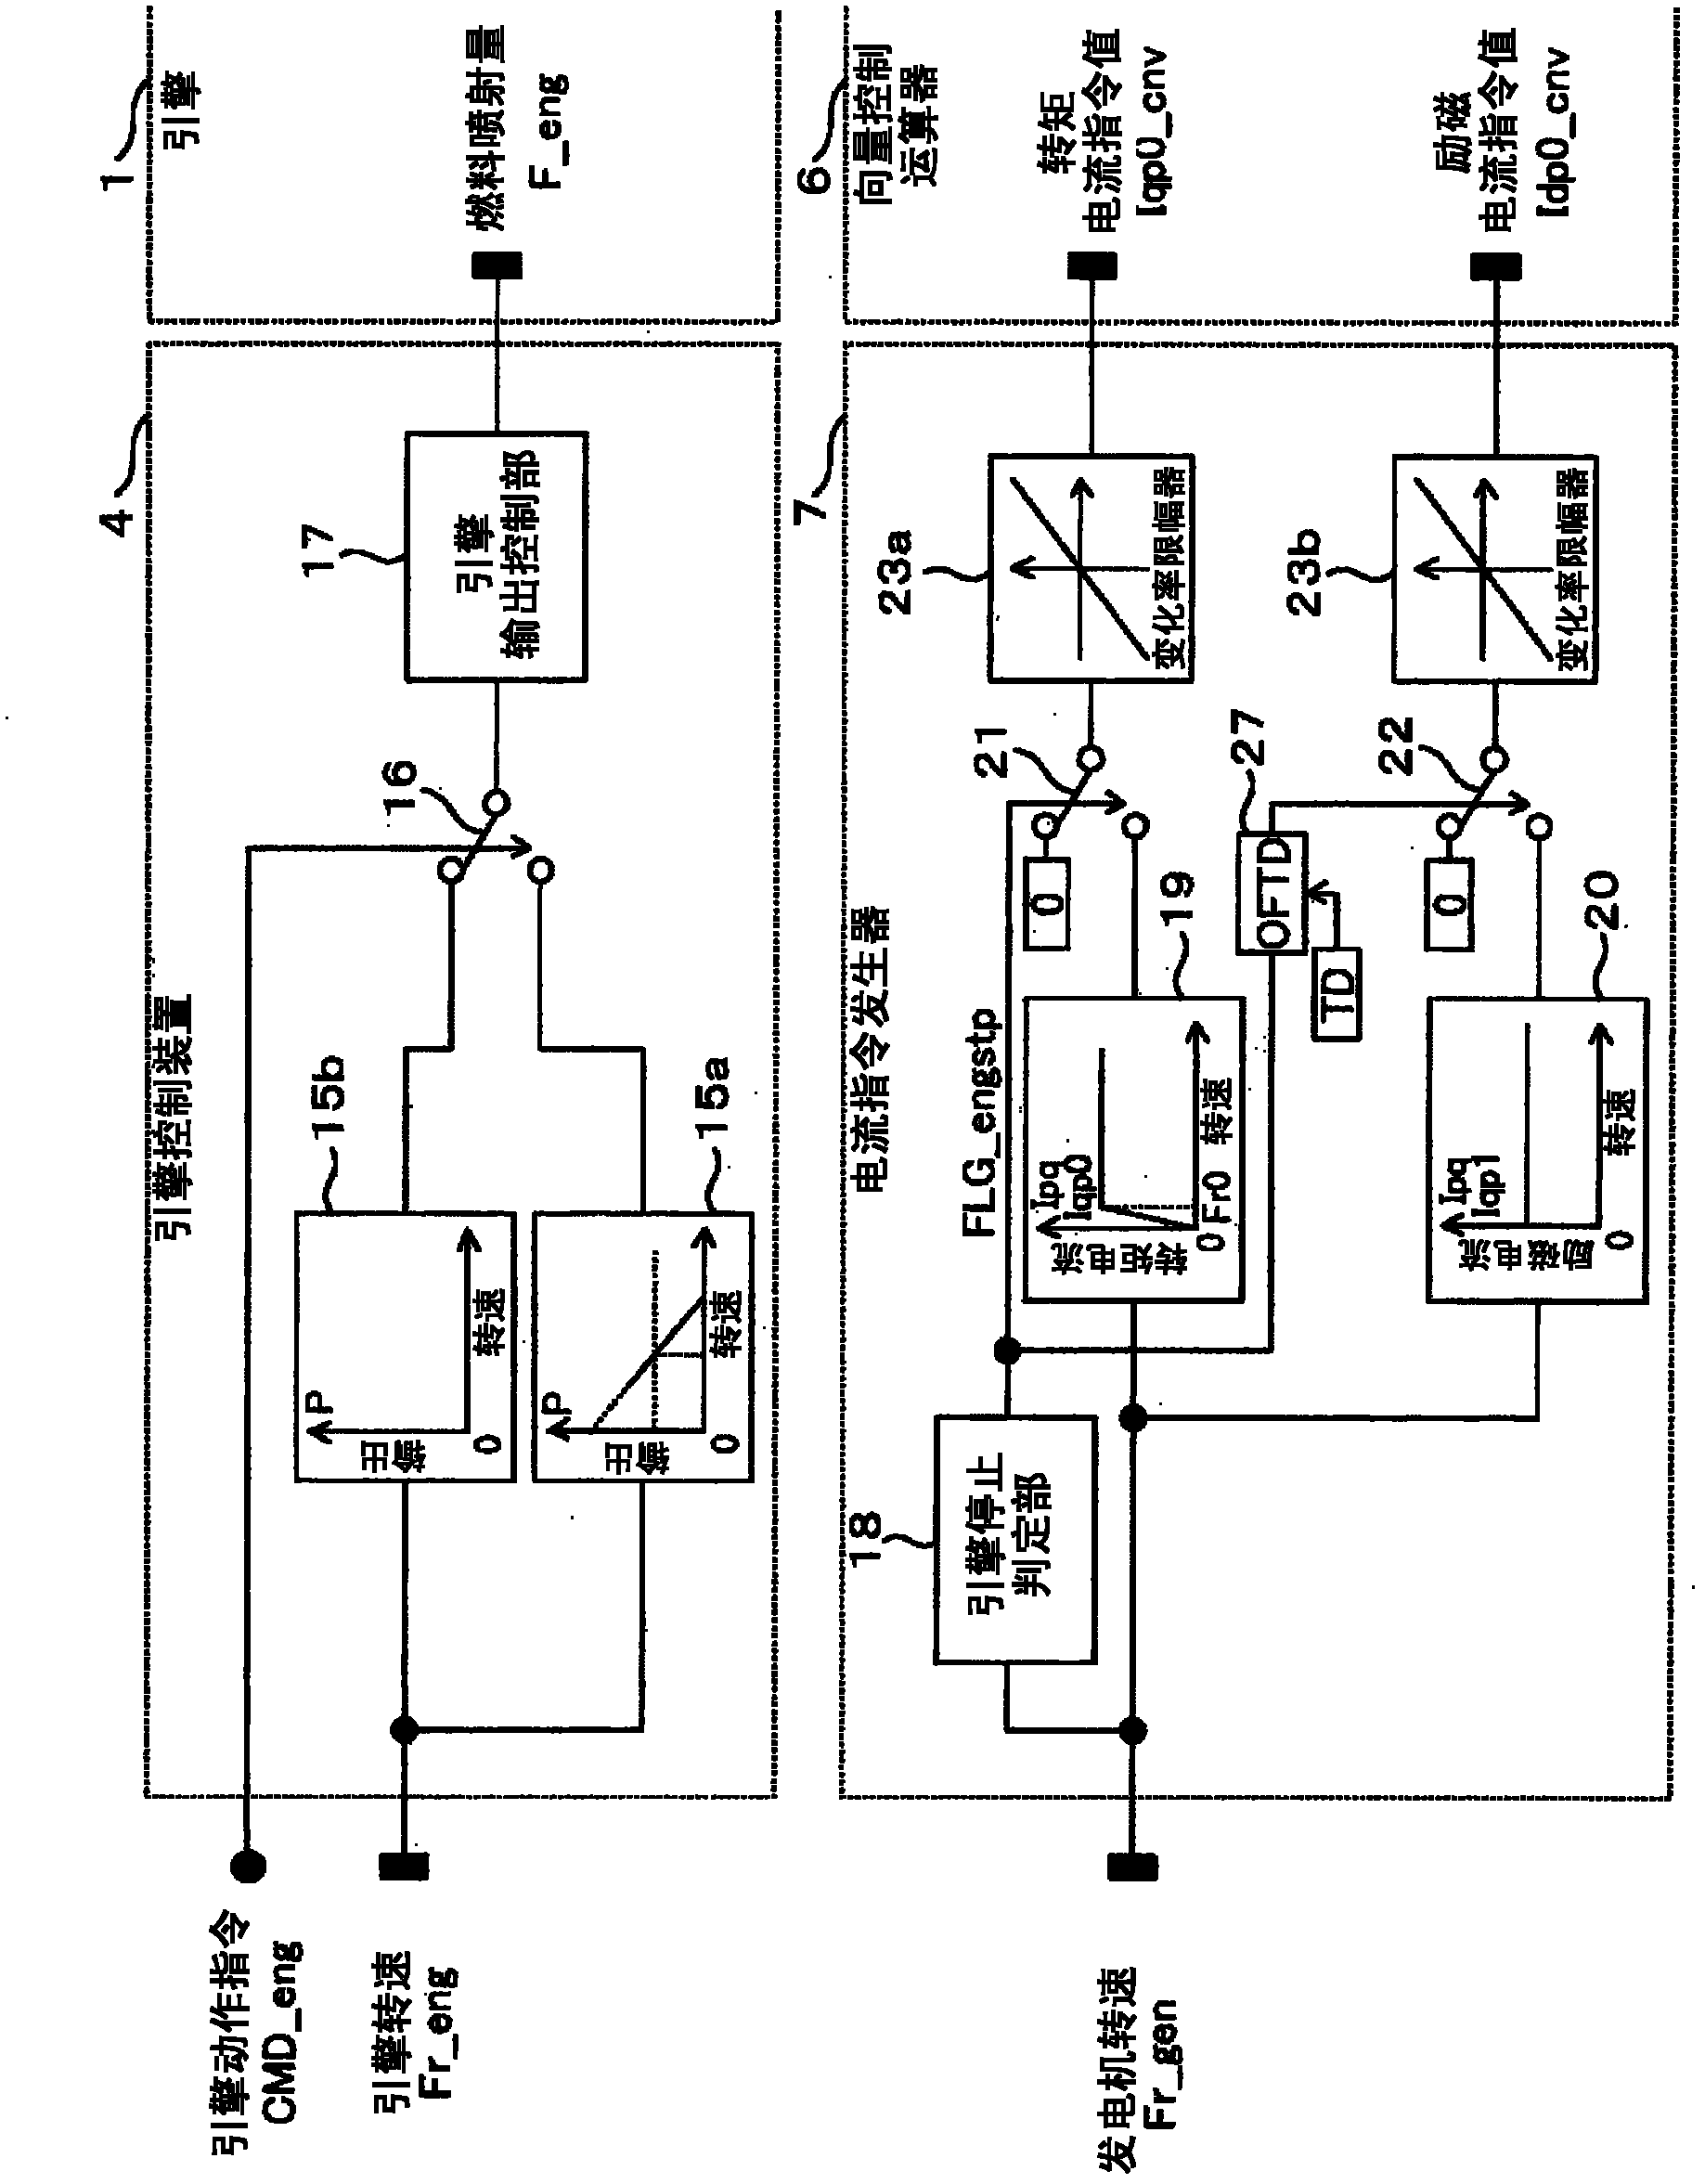 Generation system for rail cars